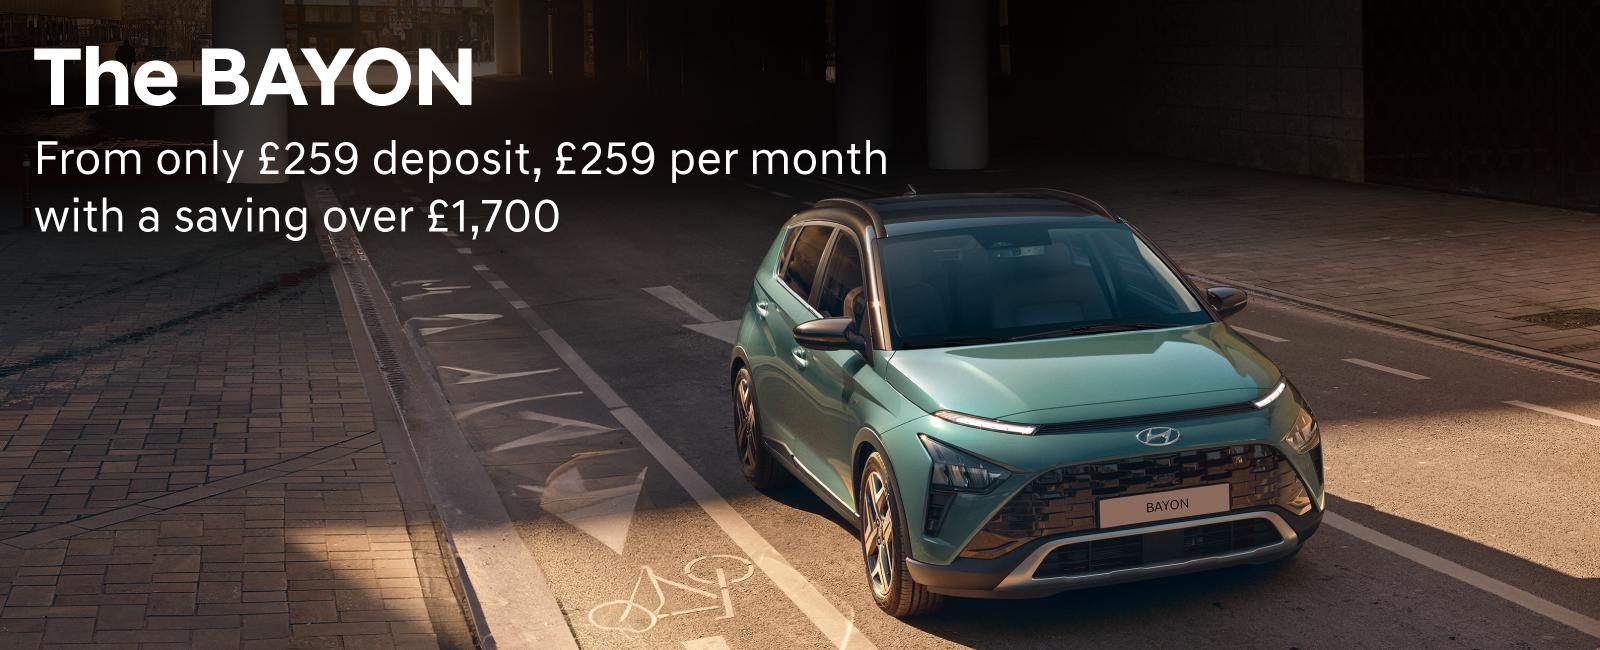 The Hyundai BAYON from only £259 deposit, £259 per month